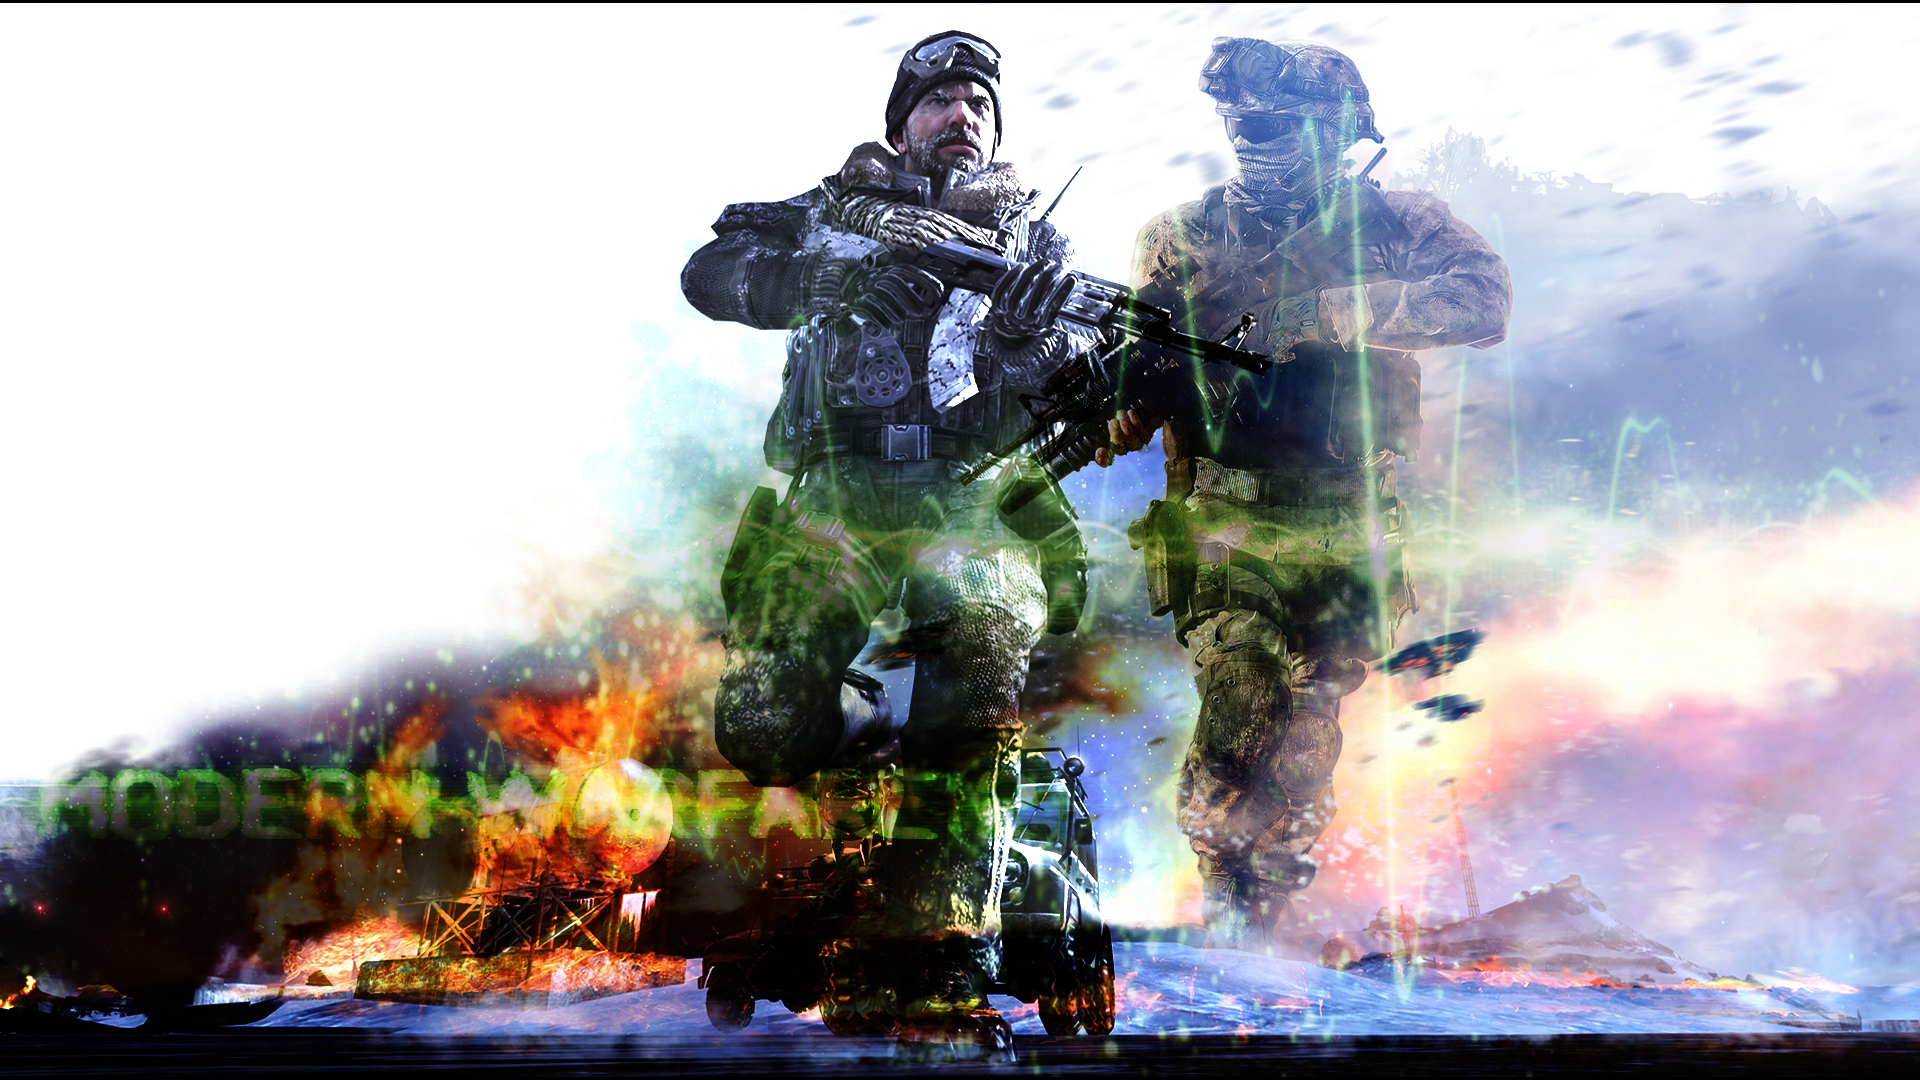 Mw2 Backgrounds